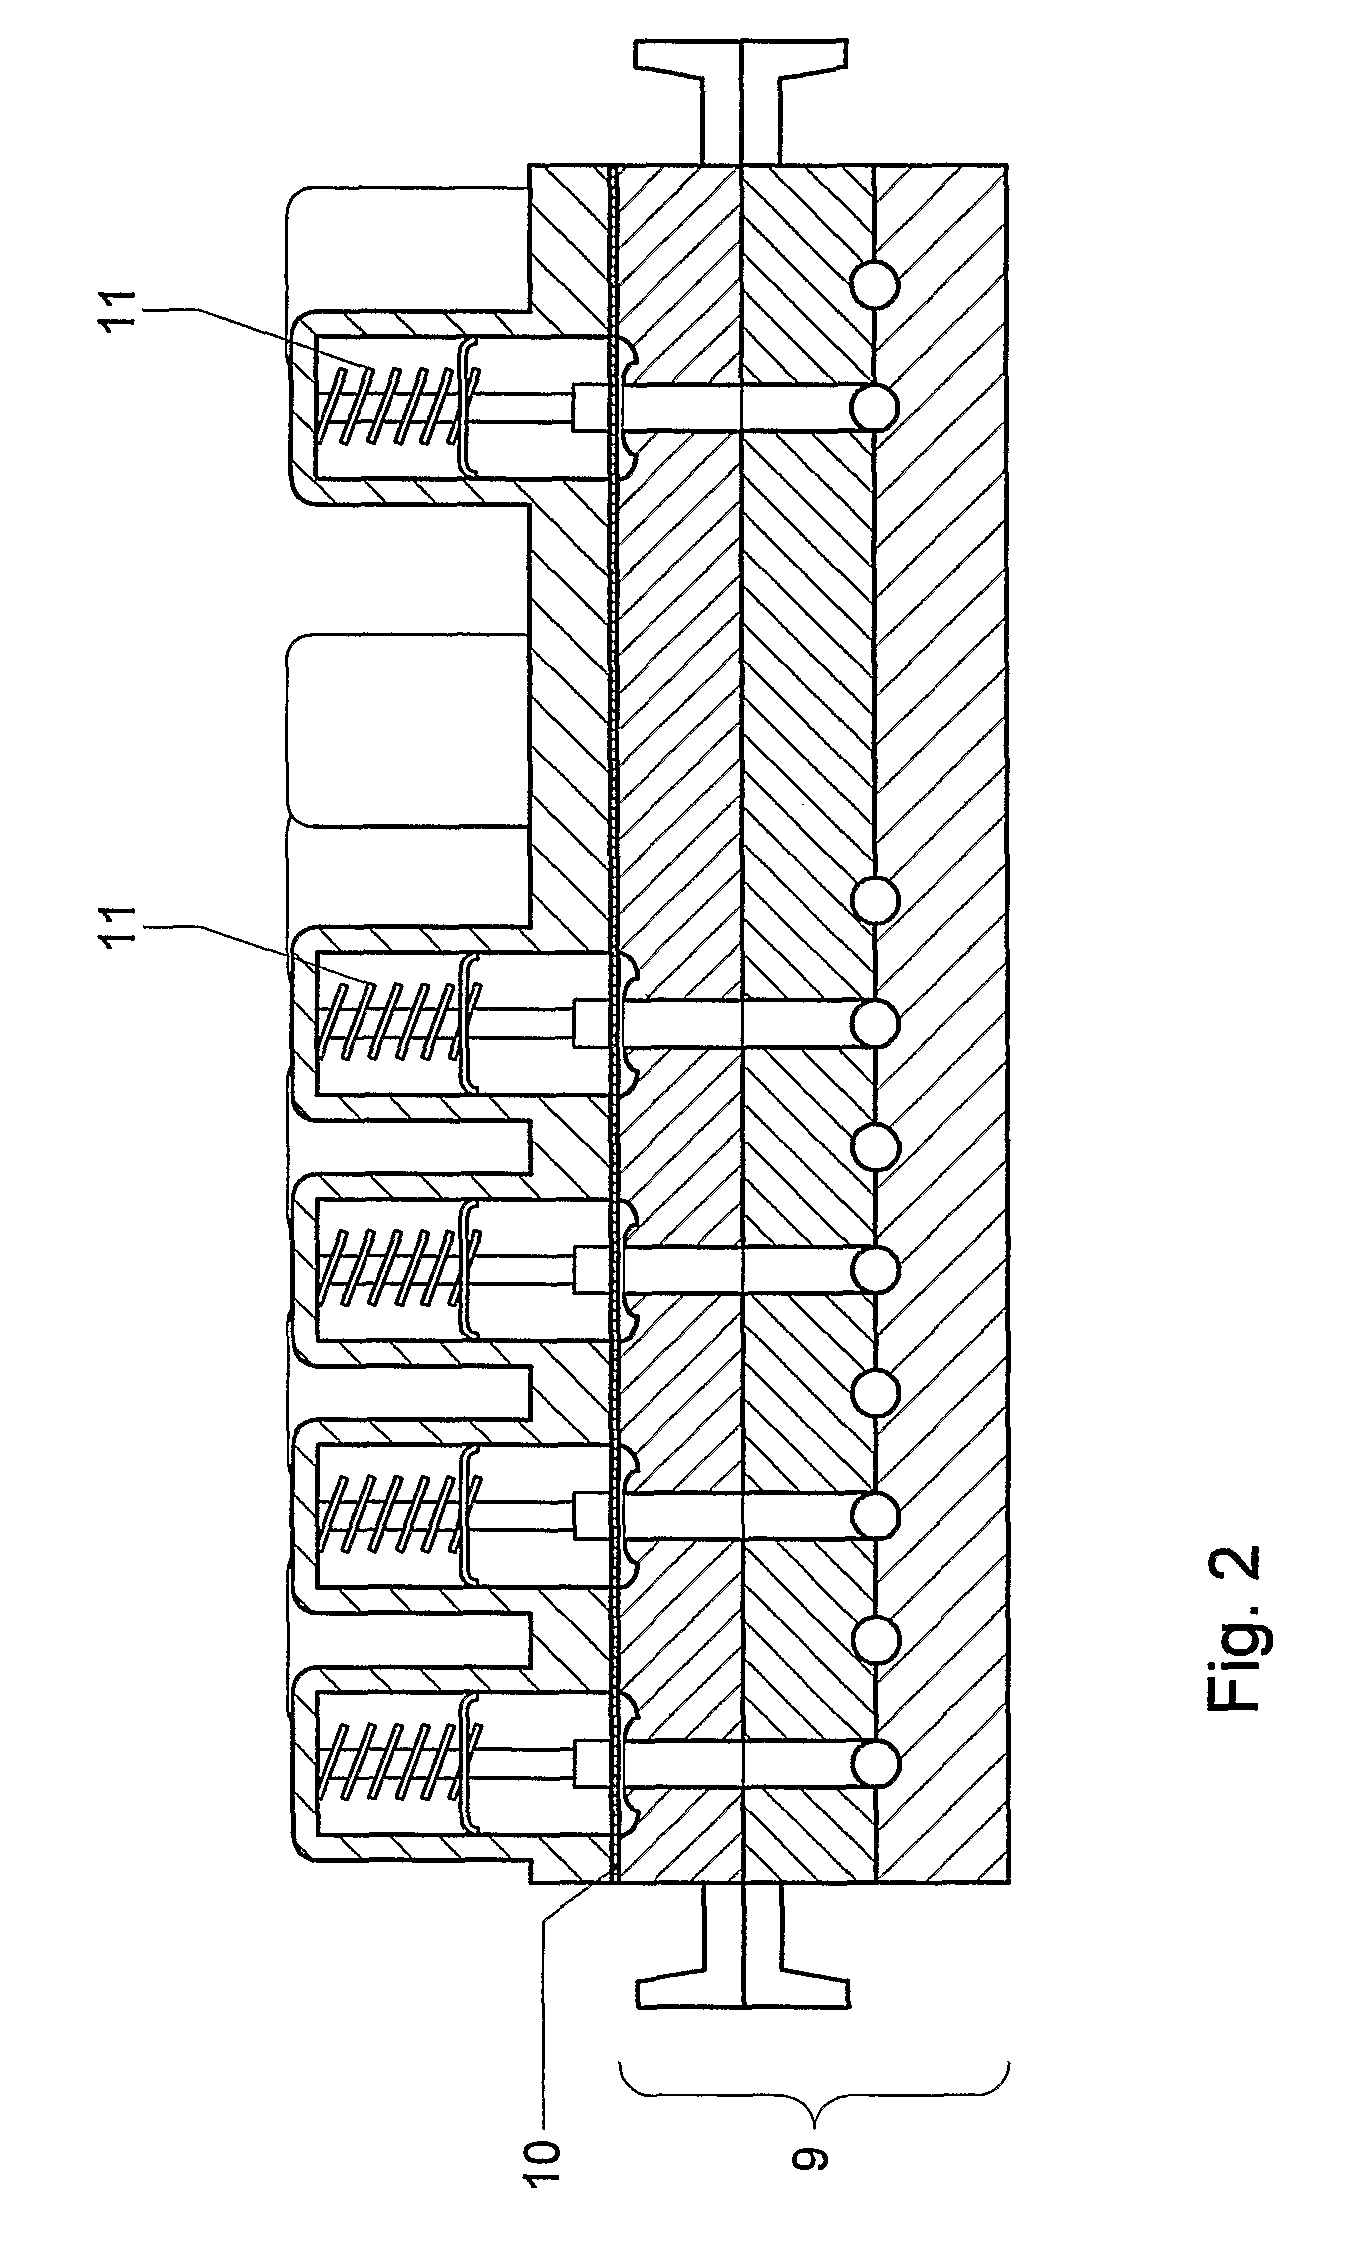 Device for chromatographic separations